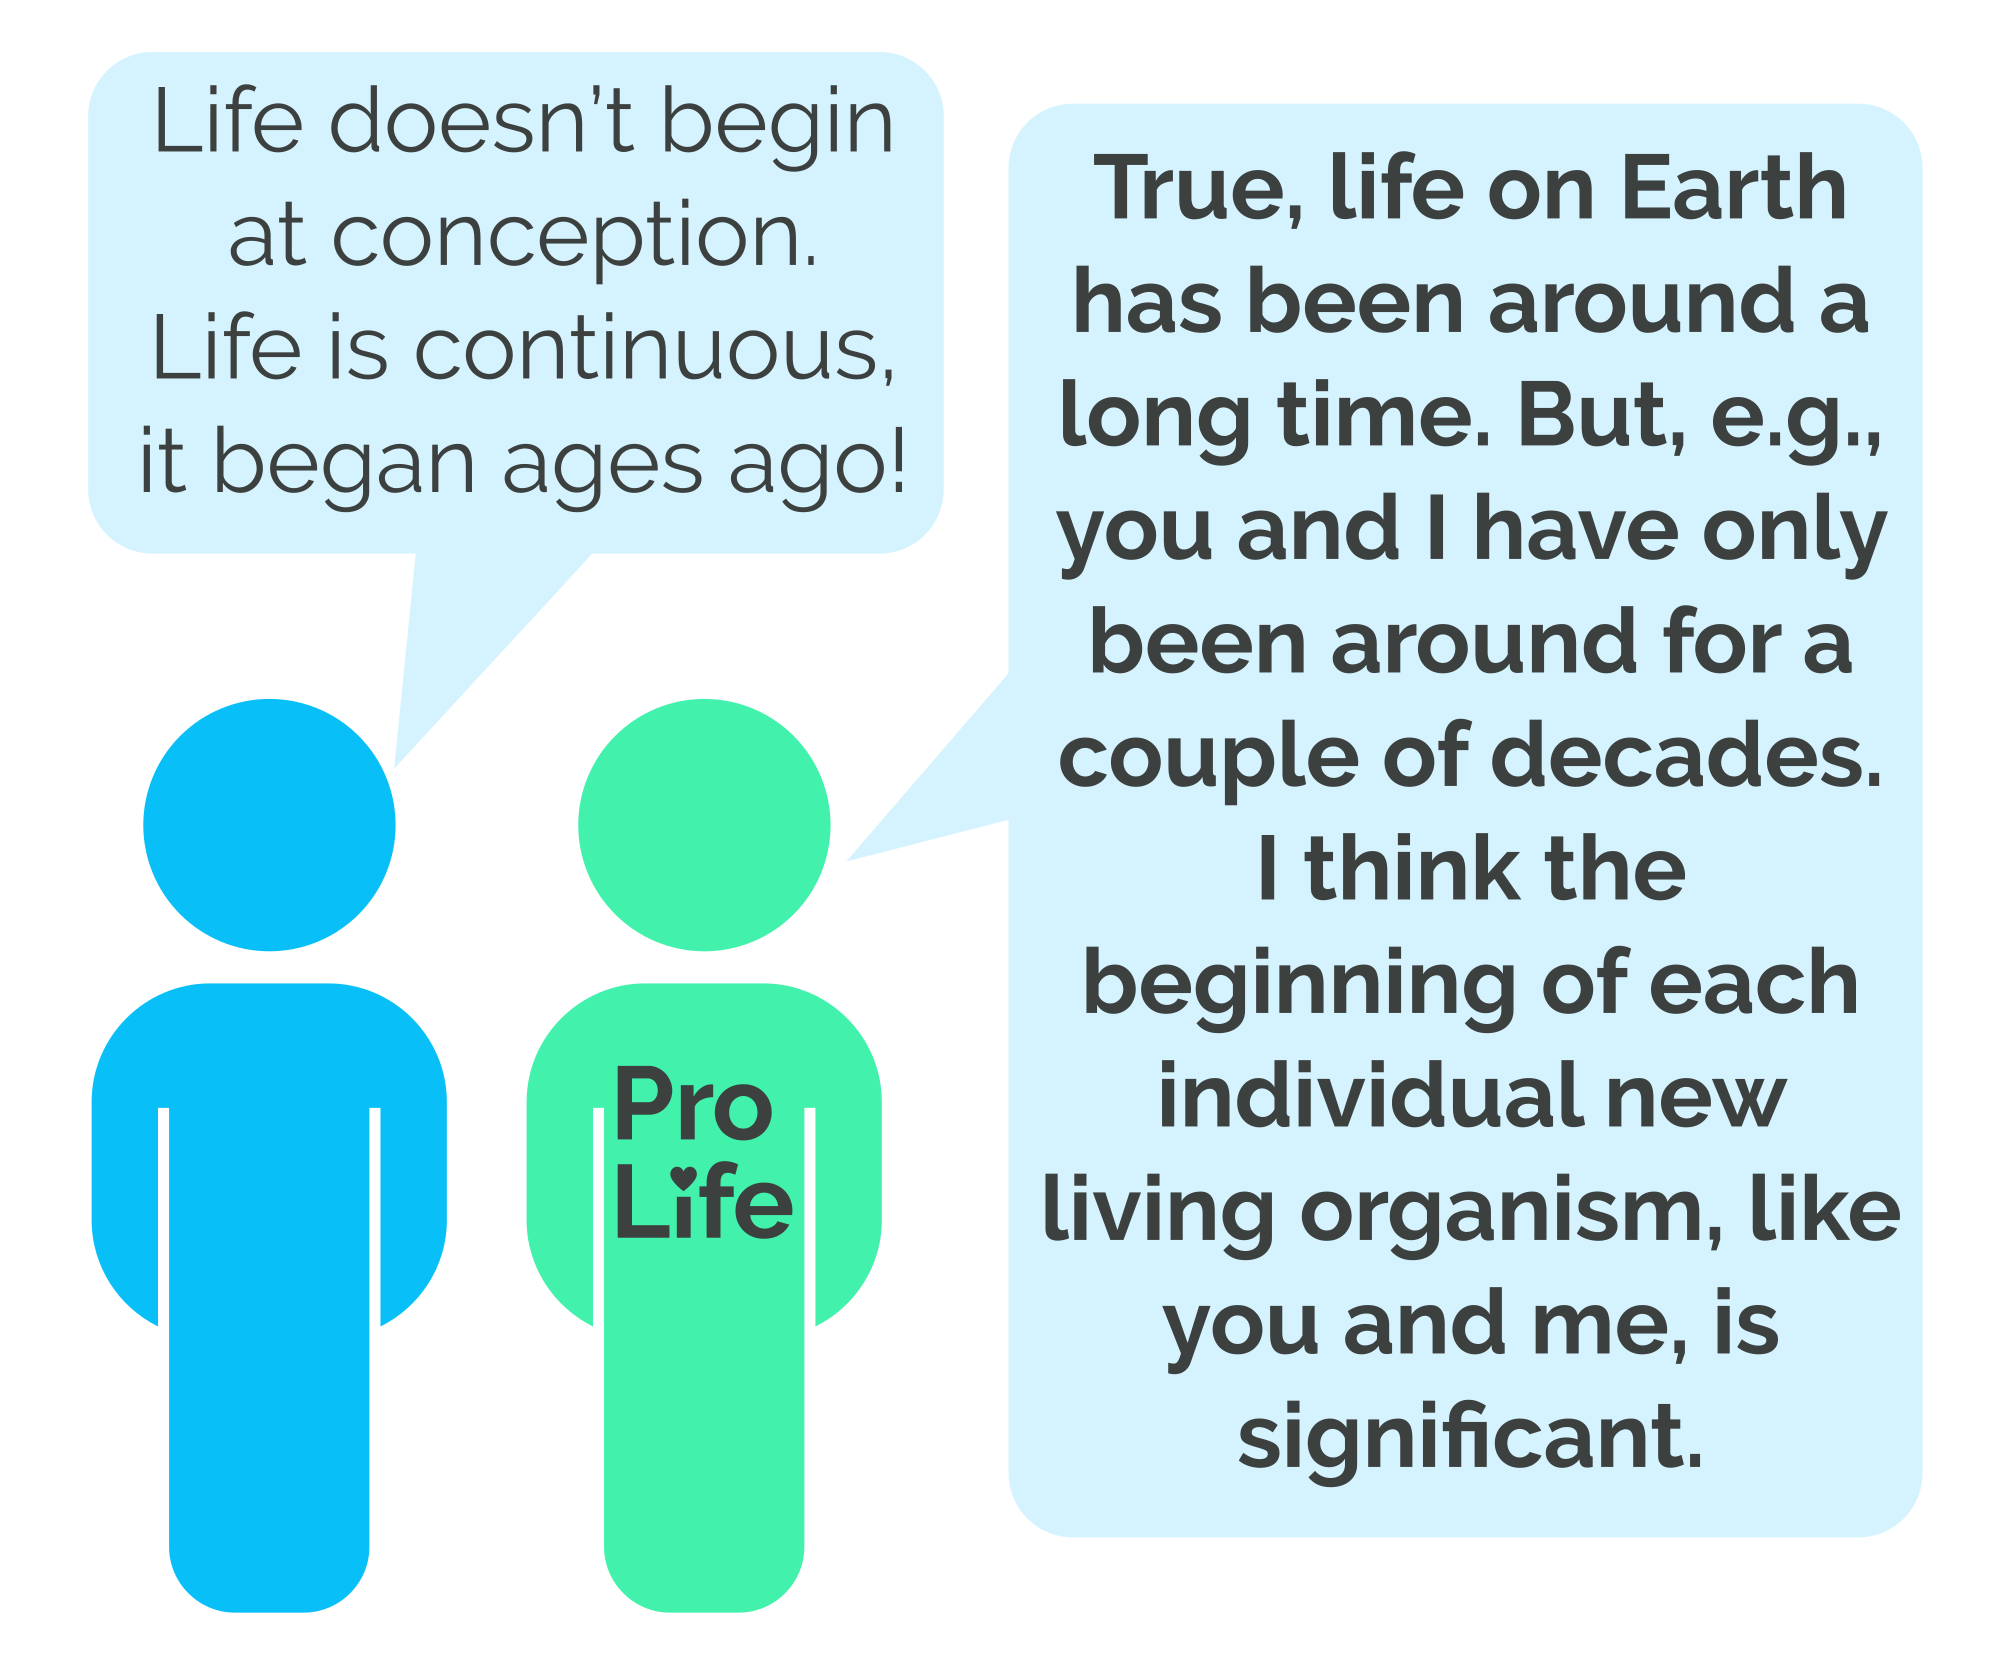 Person 1: Life doesn’t begin at conception. Life is continuous, it began ages ago! Person 2 (our hero): True, life on Earth has been around a long time. But, e.g., you and I have only been around for a couple of decades. I think the beginning of each individual new living organism, like you and me, is significant.